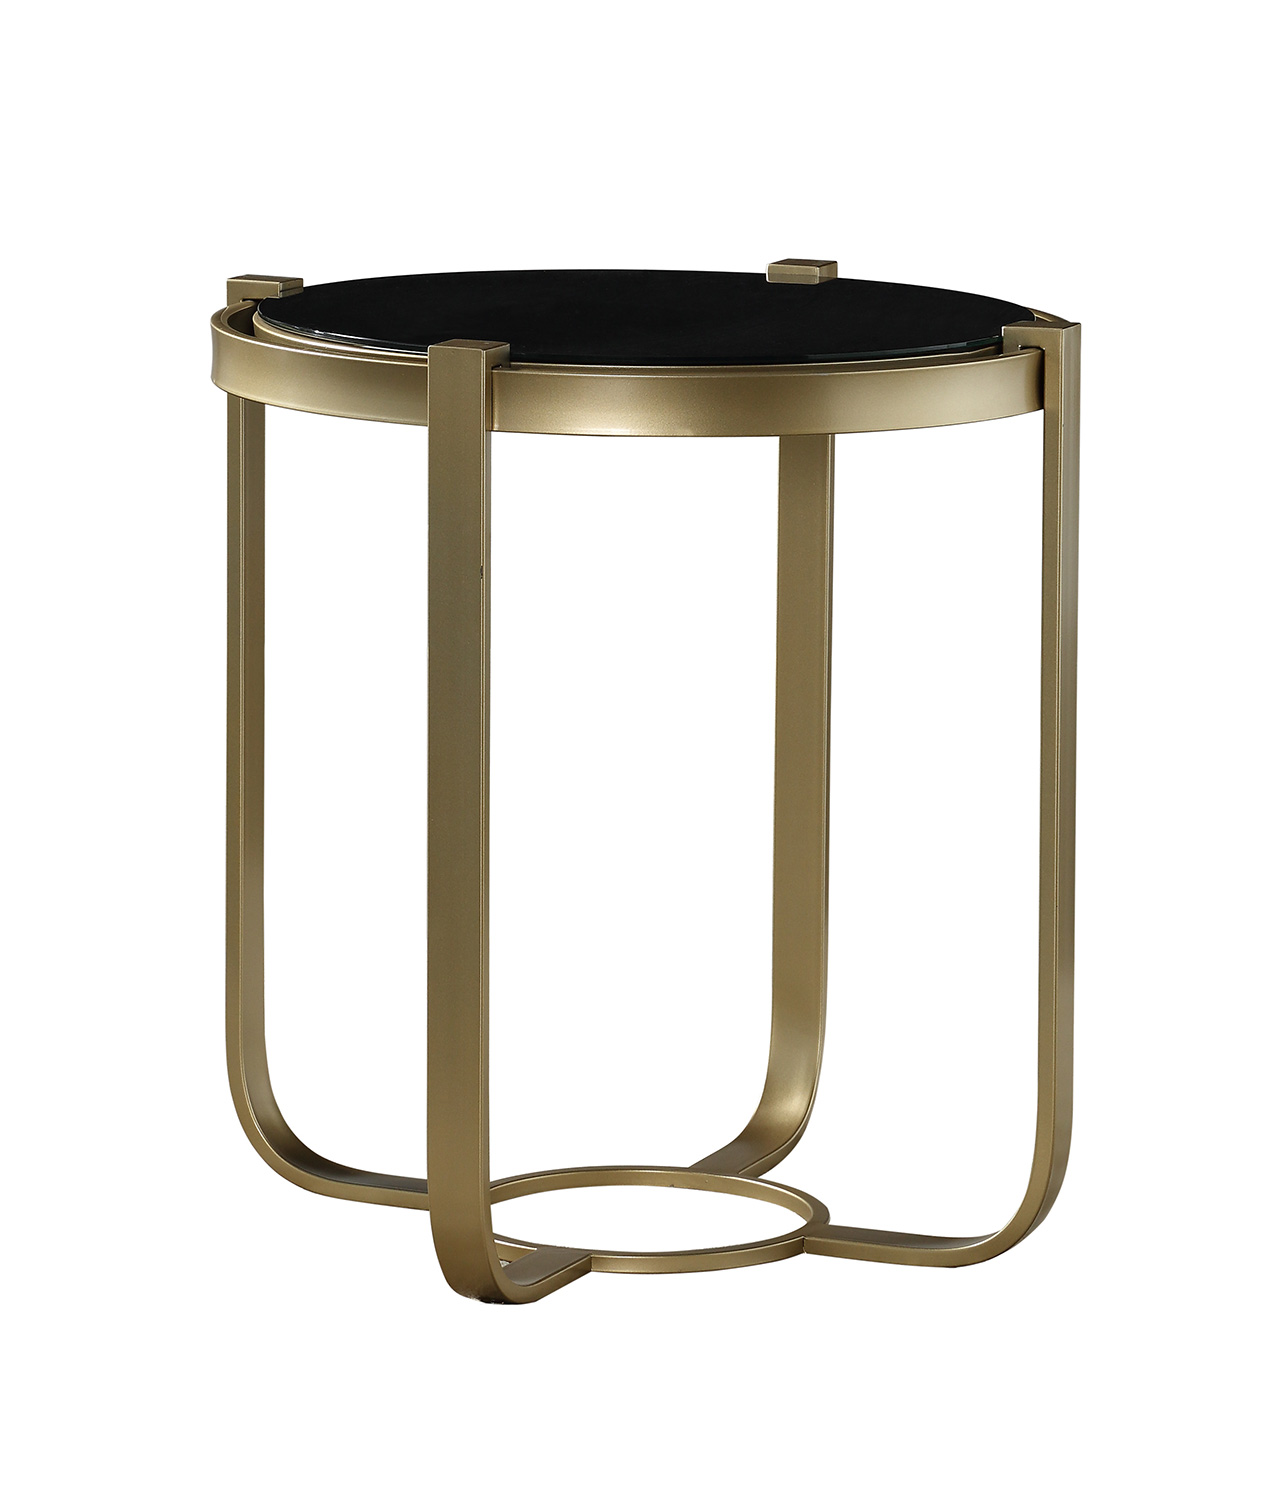 Homelegance Caracal Round End Table with Black Glass Insert - Gold